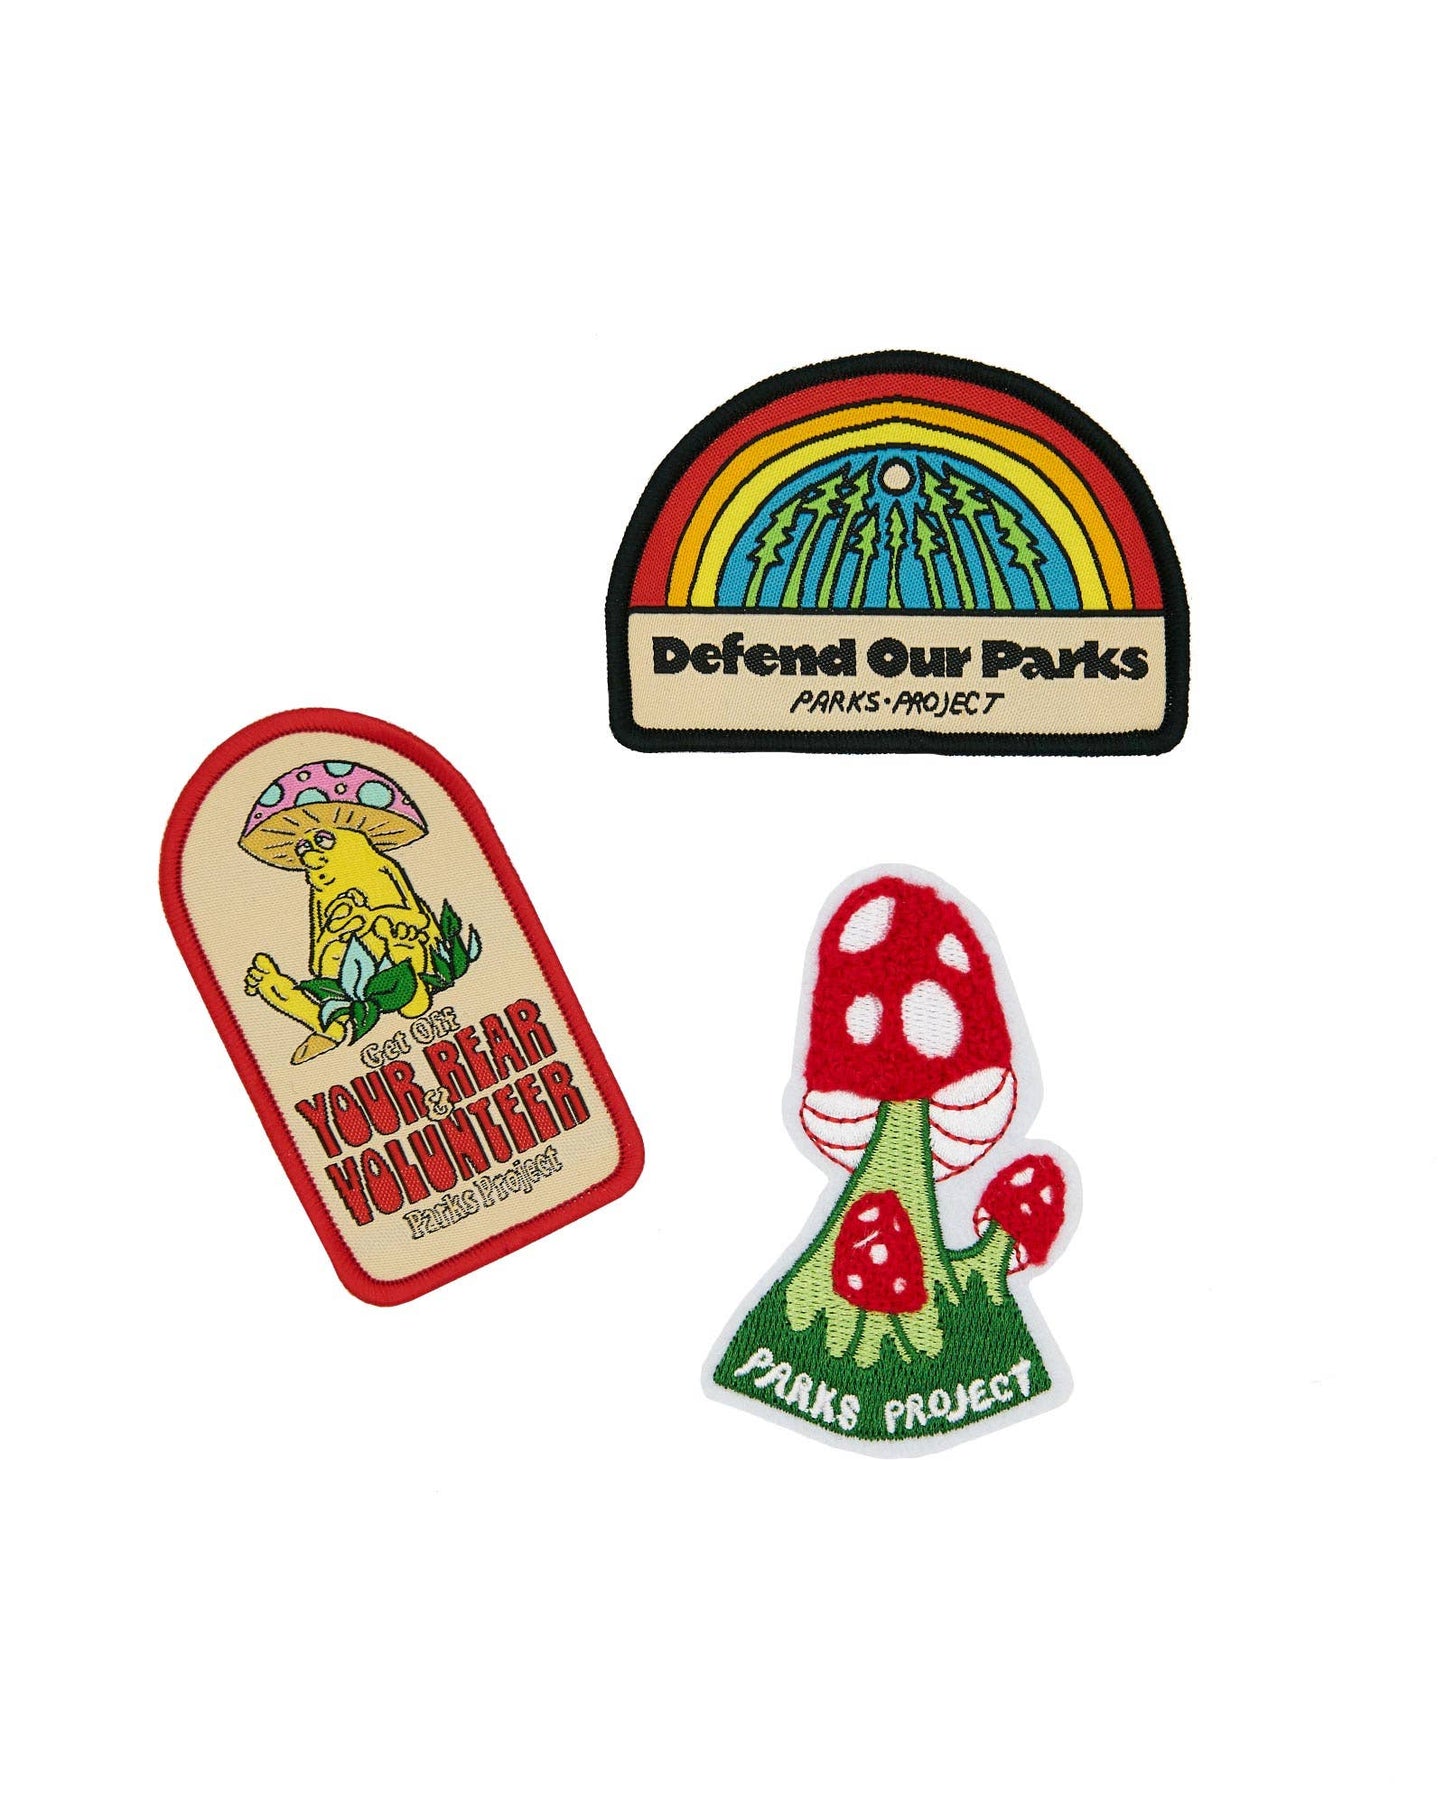 Patch collection by Parks Project with Defend Our Parks rainbow forest patch, Mushroom Get off your rear and volunteer patch and Mushroom Parks Project patch